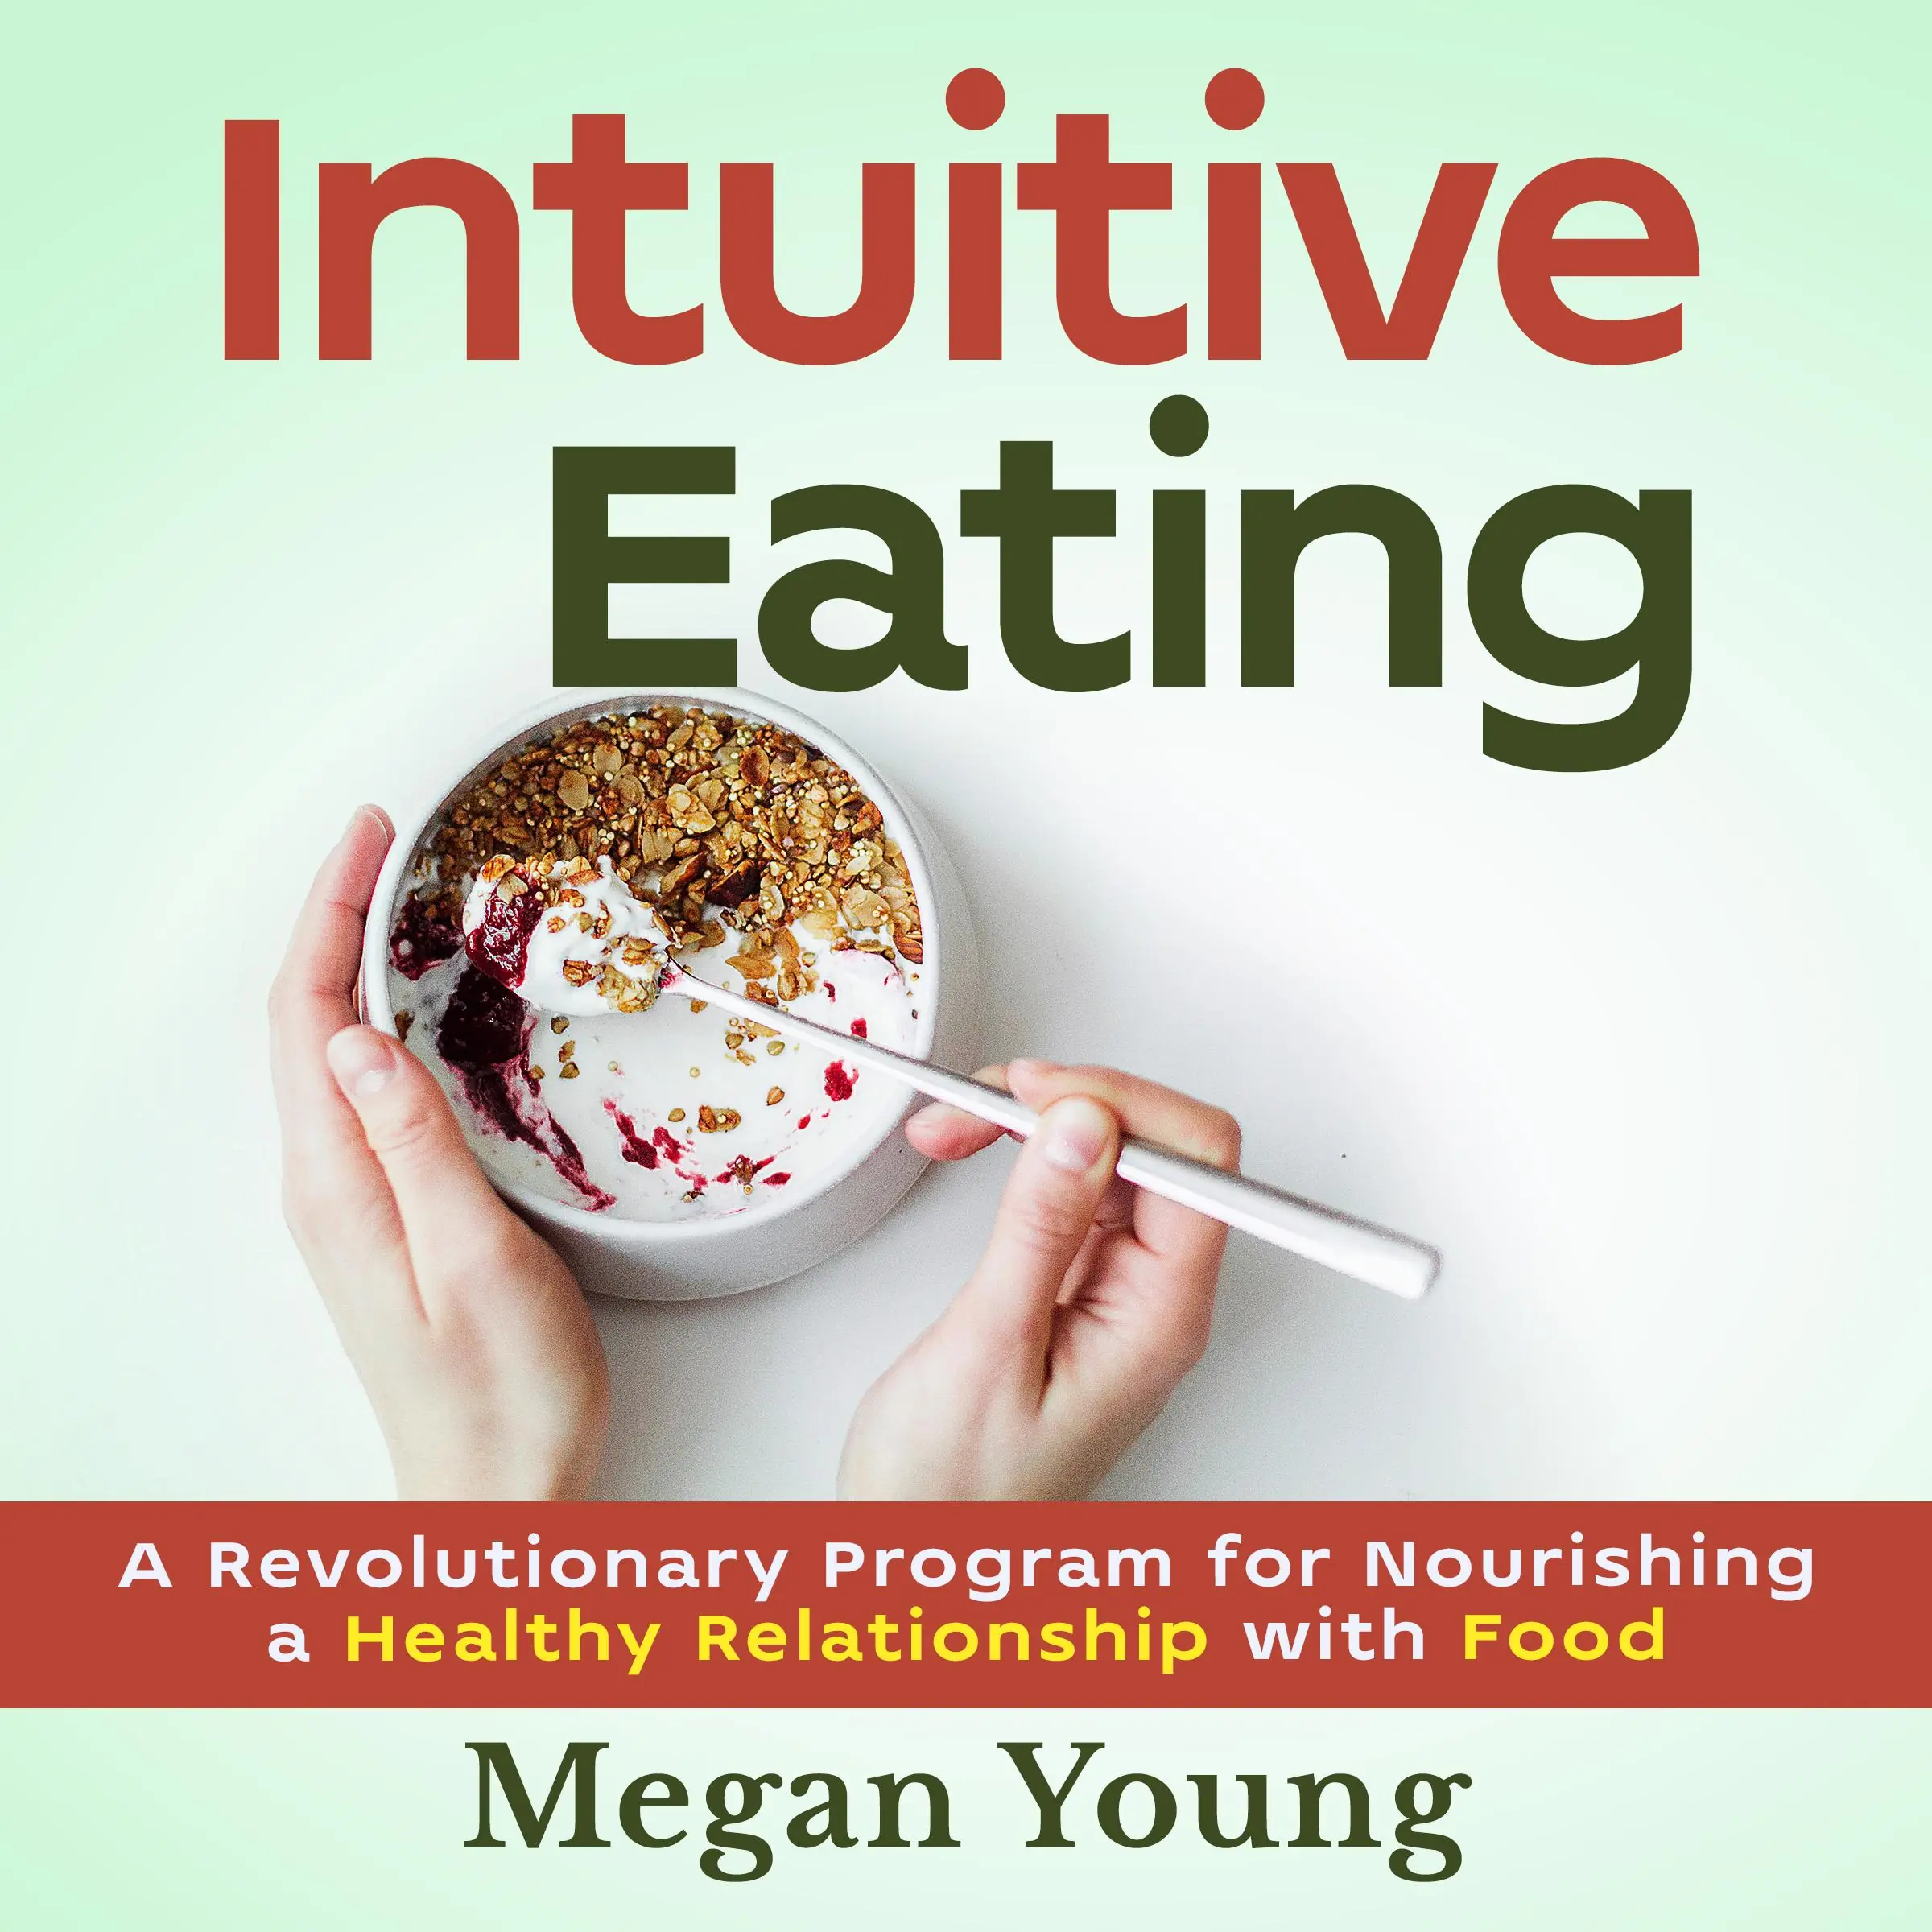 Intuitive eating Audiobook by Megan Young